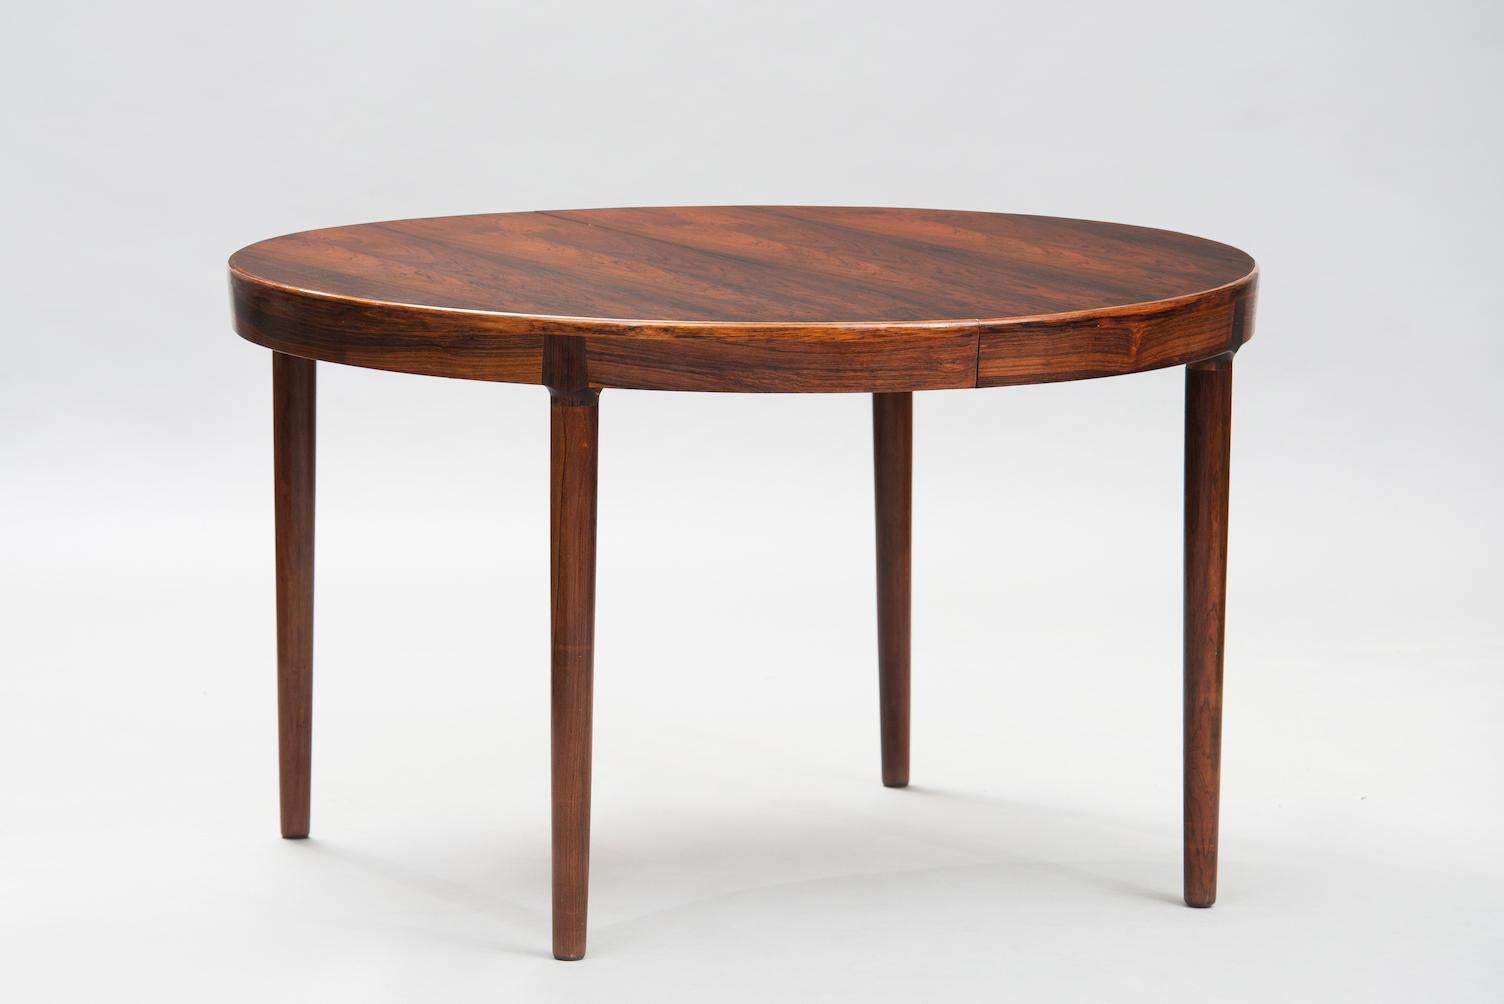 Niels Otto Moller rosewood extendible dining table. 
Diameter closed: 120cm
This item is in original condition, can be sold as it is or fully restored, the price shown is in original condition.
 